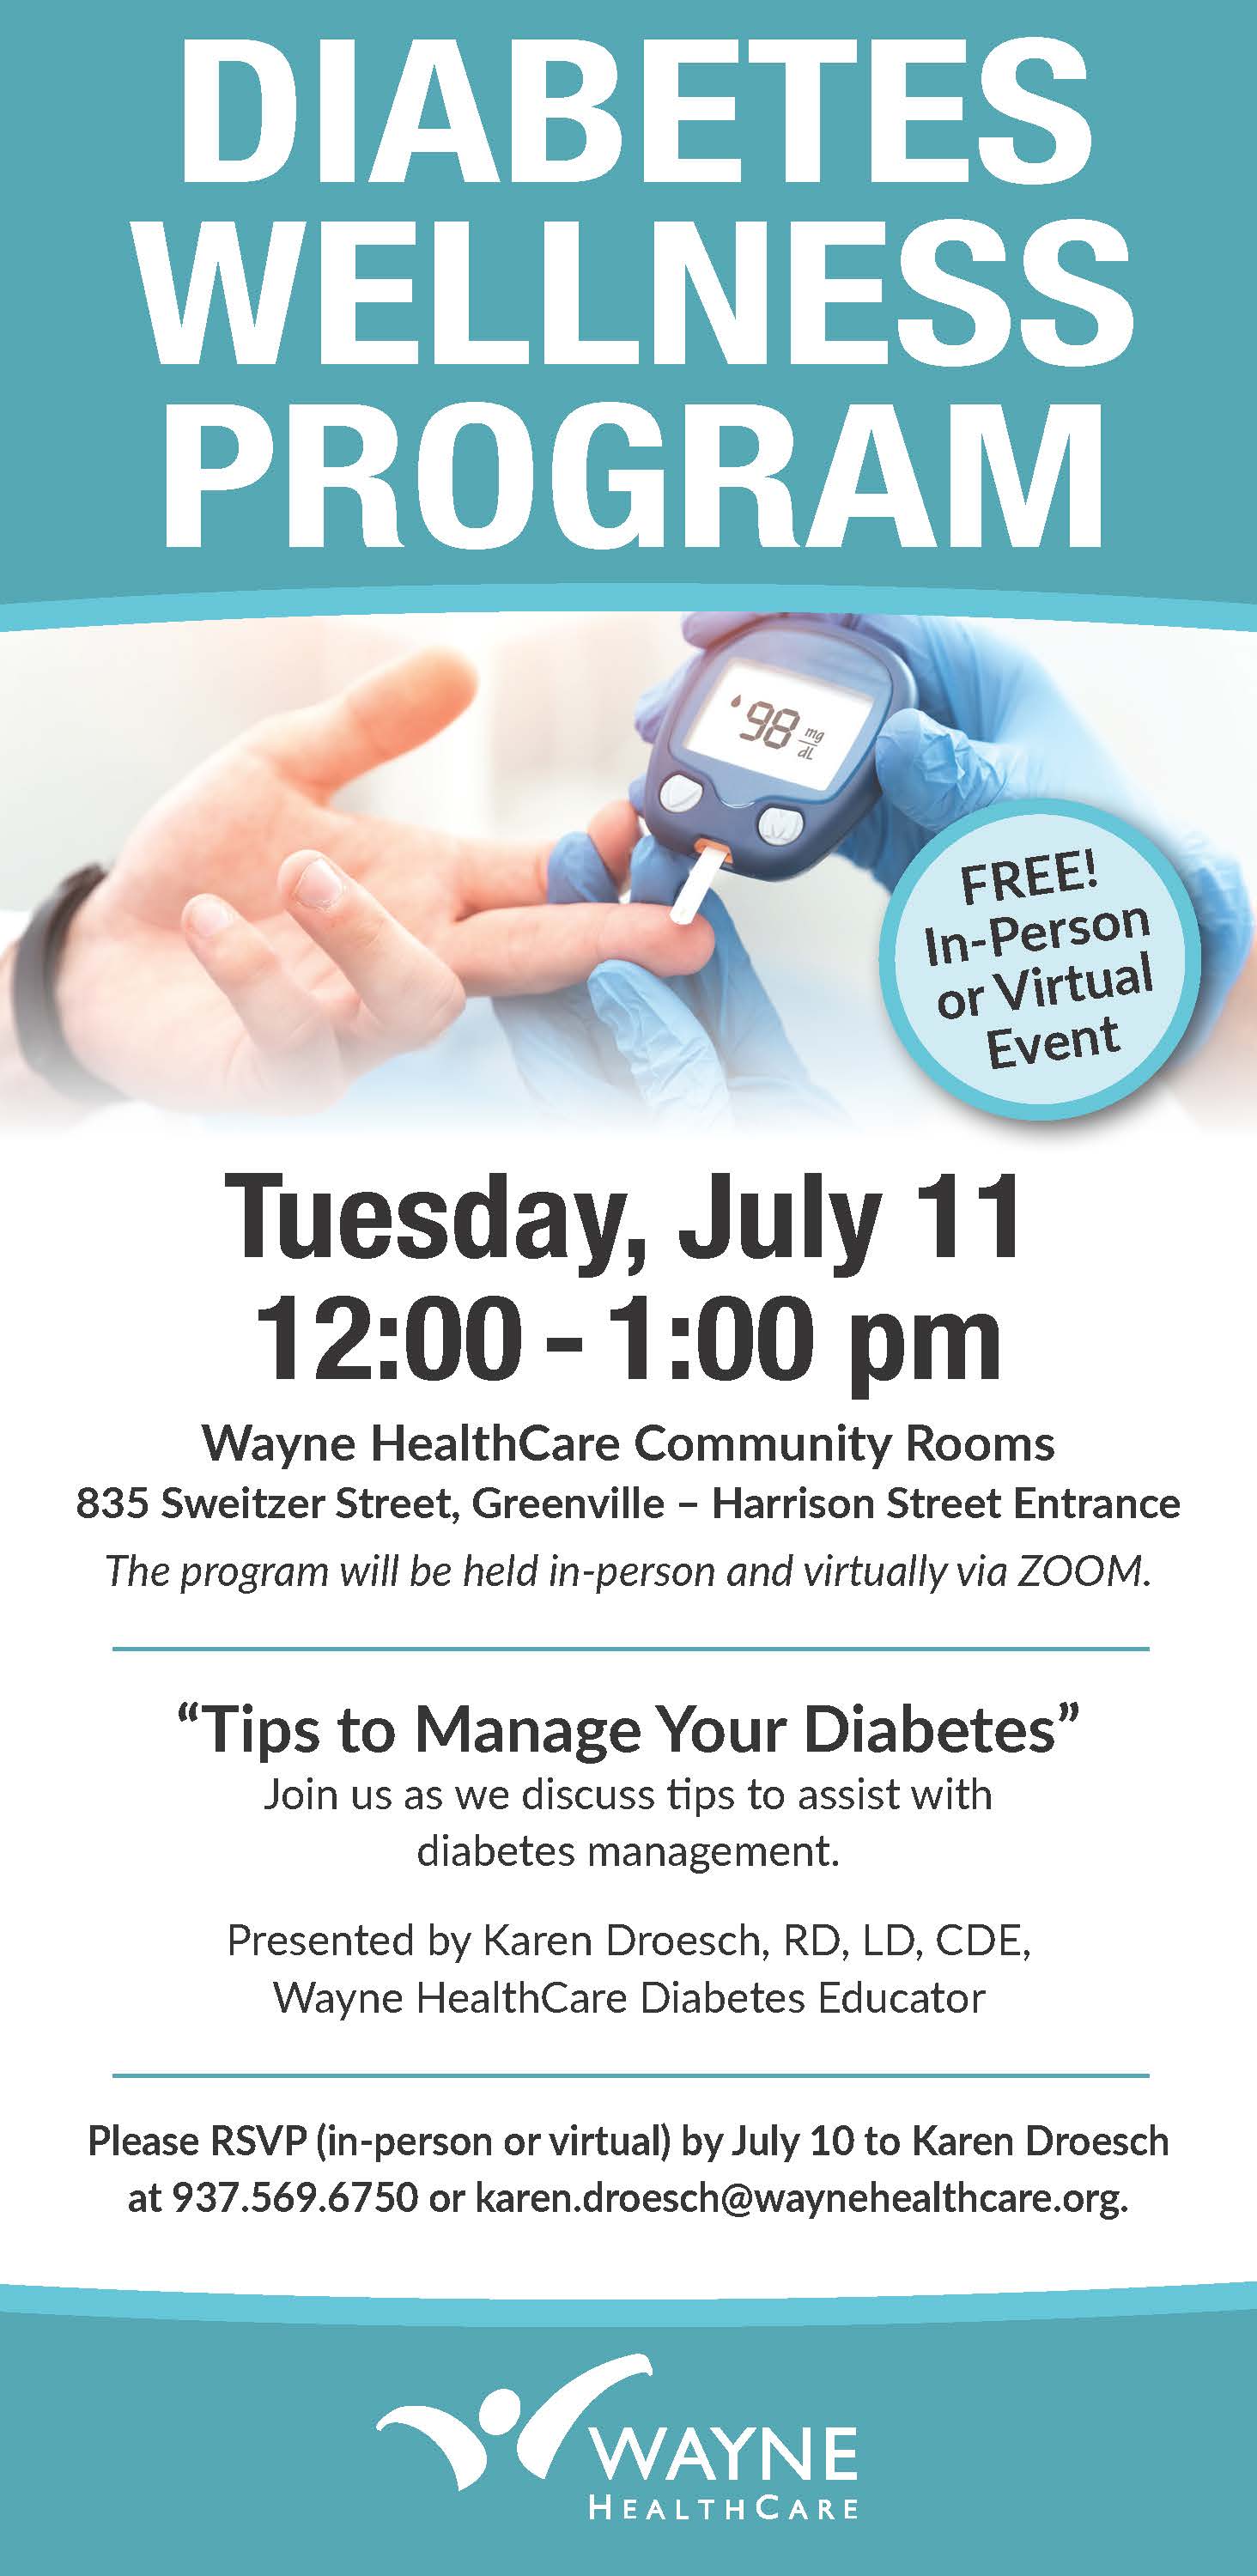 Checking a finger with glucose meter and diabetes program information